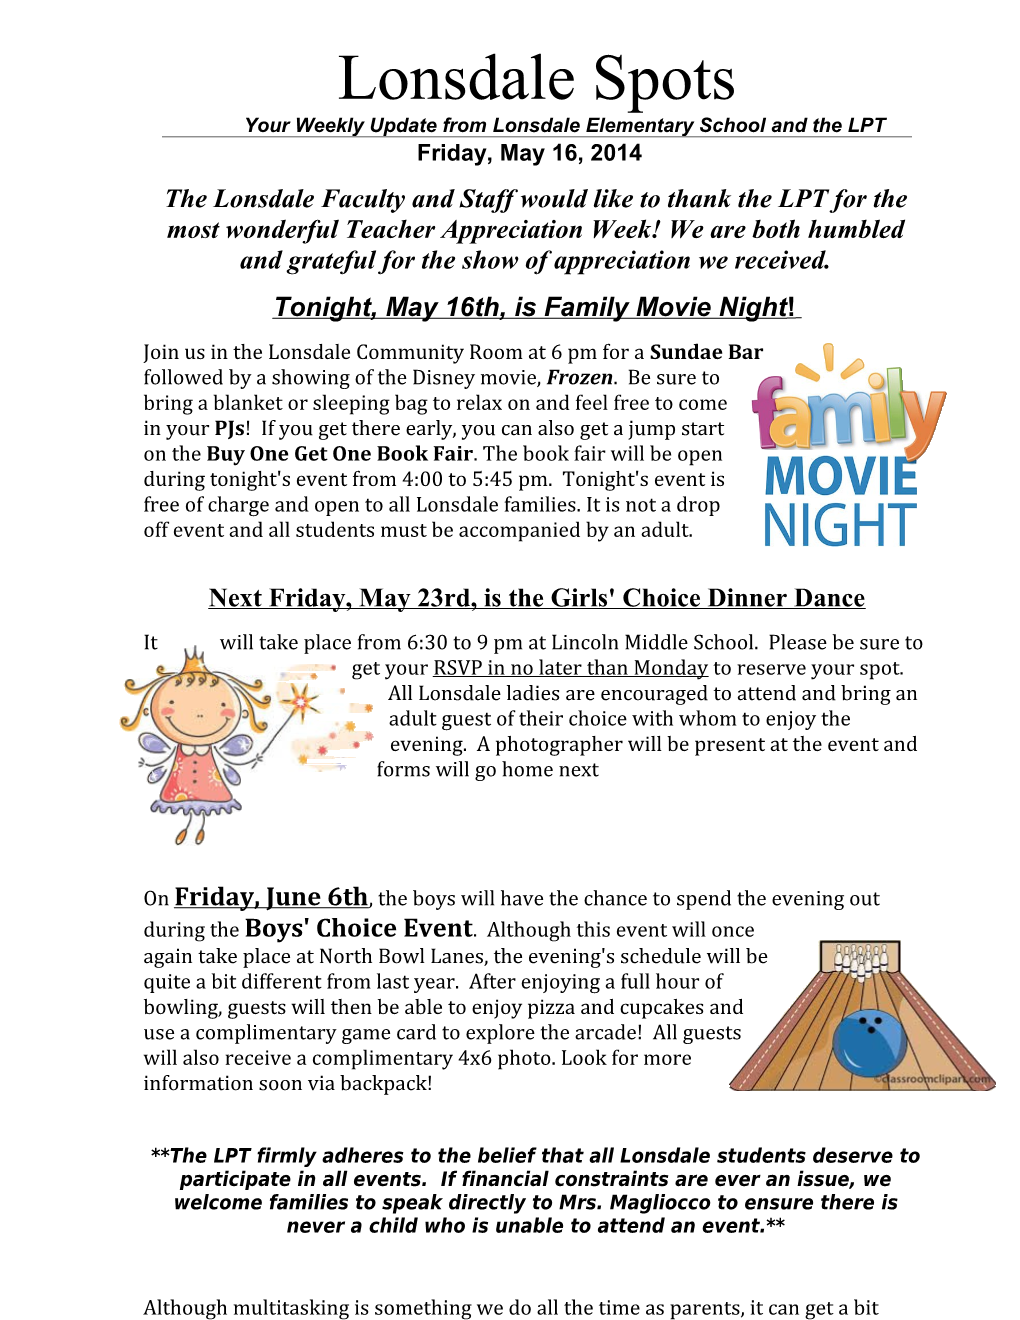 Your Weekly Update from Lonsdale Elementary School and the LPT s4